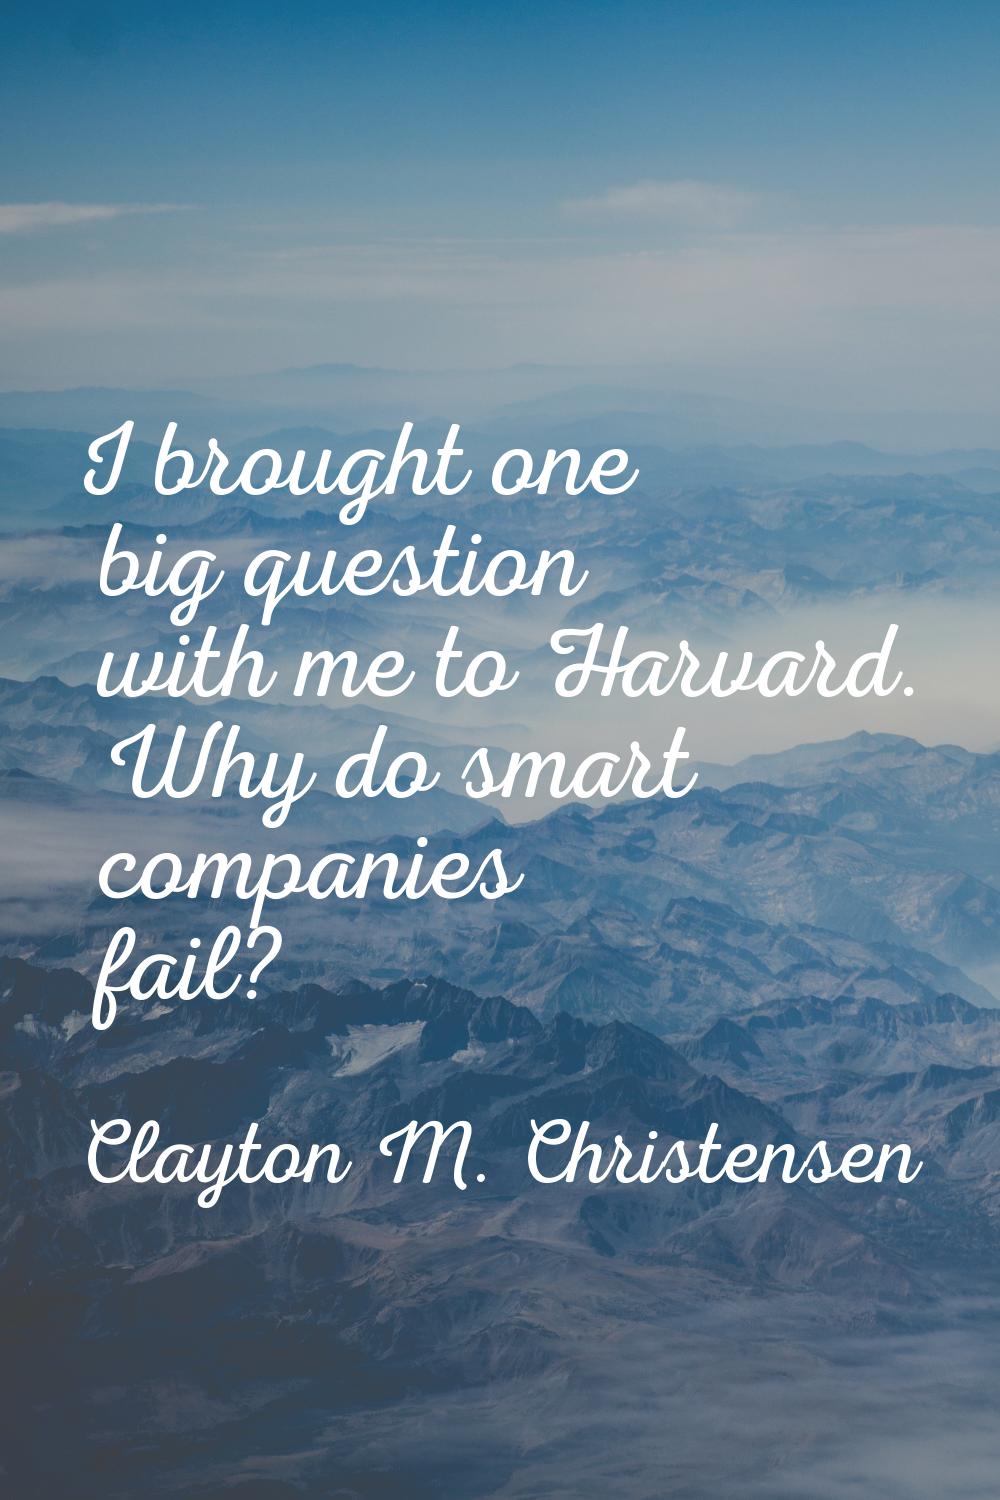 I brought one big question with me to Harvard. Why do smart companies fail?